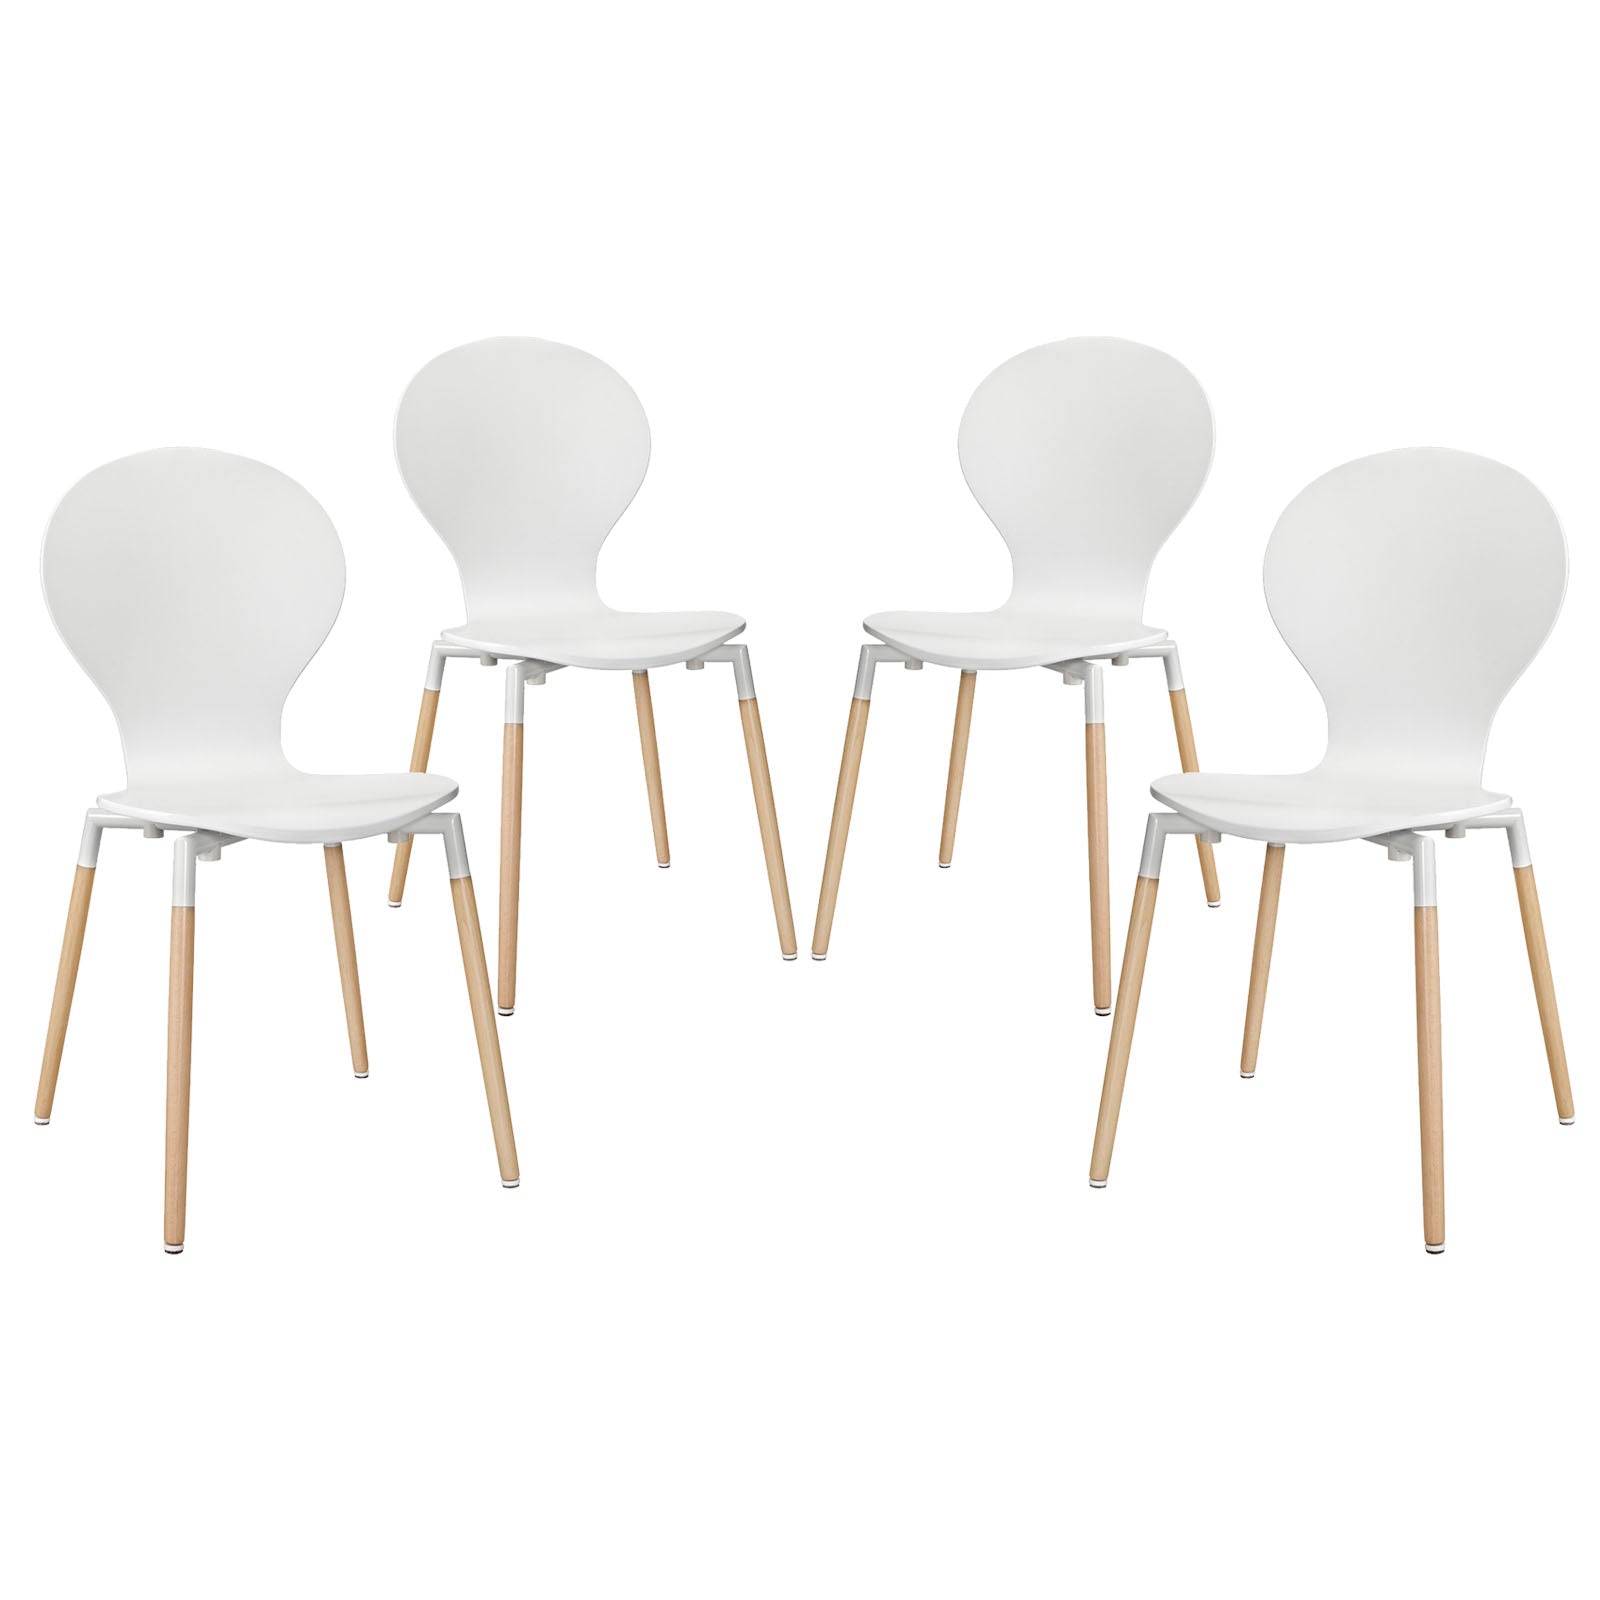 Path Dining Chair Set of 4